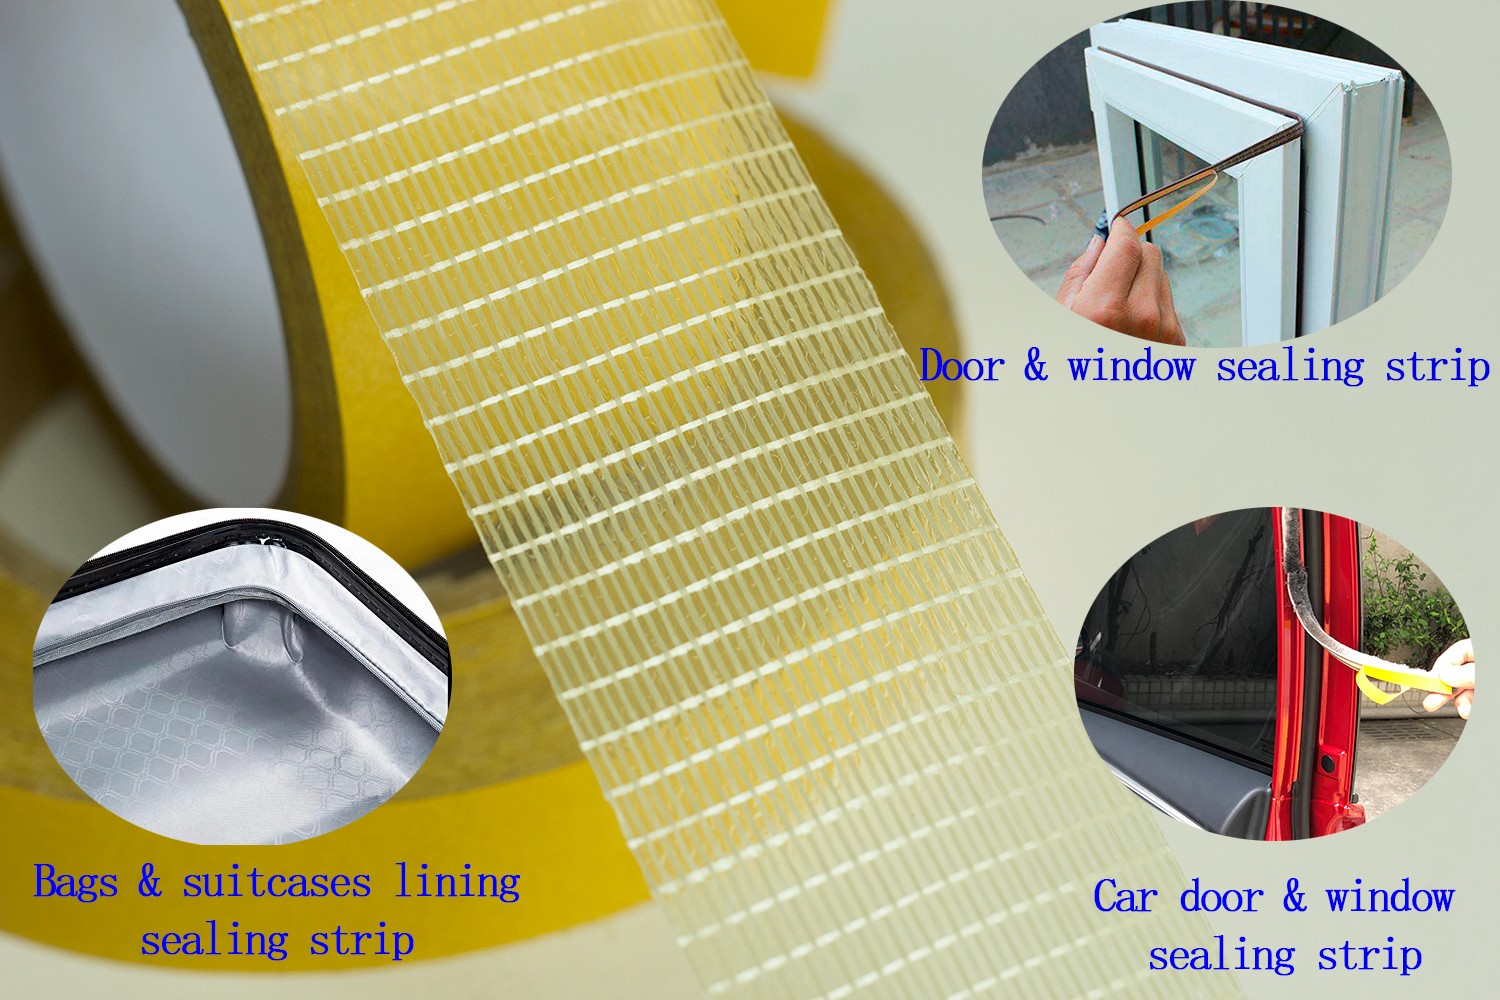 double sided filament tape for sealing strip